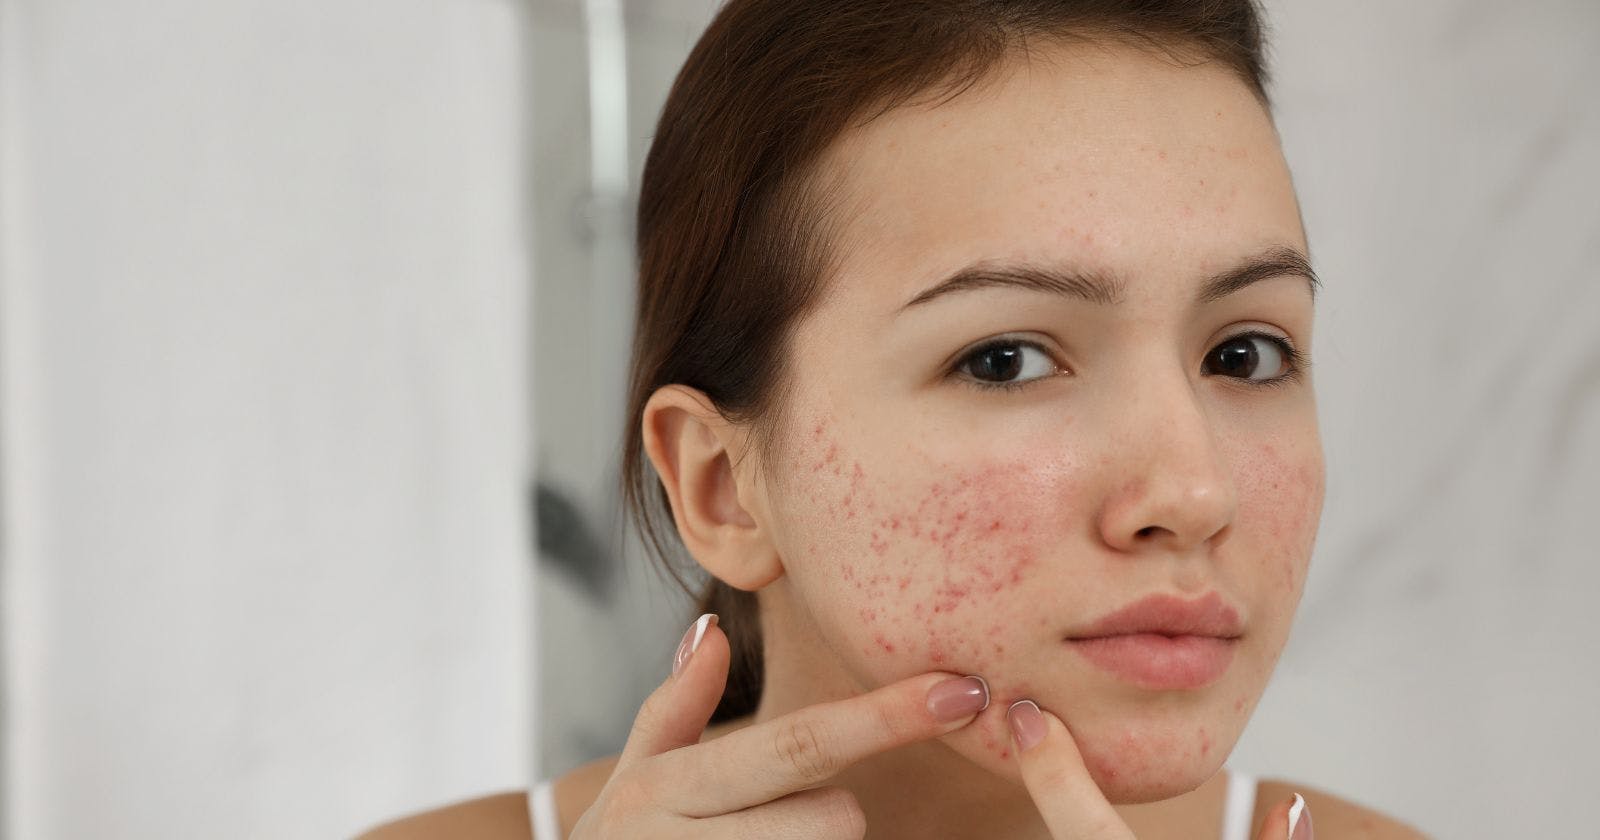 How to Deal with Pimples and Acne Scars?